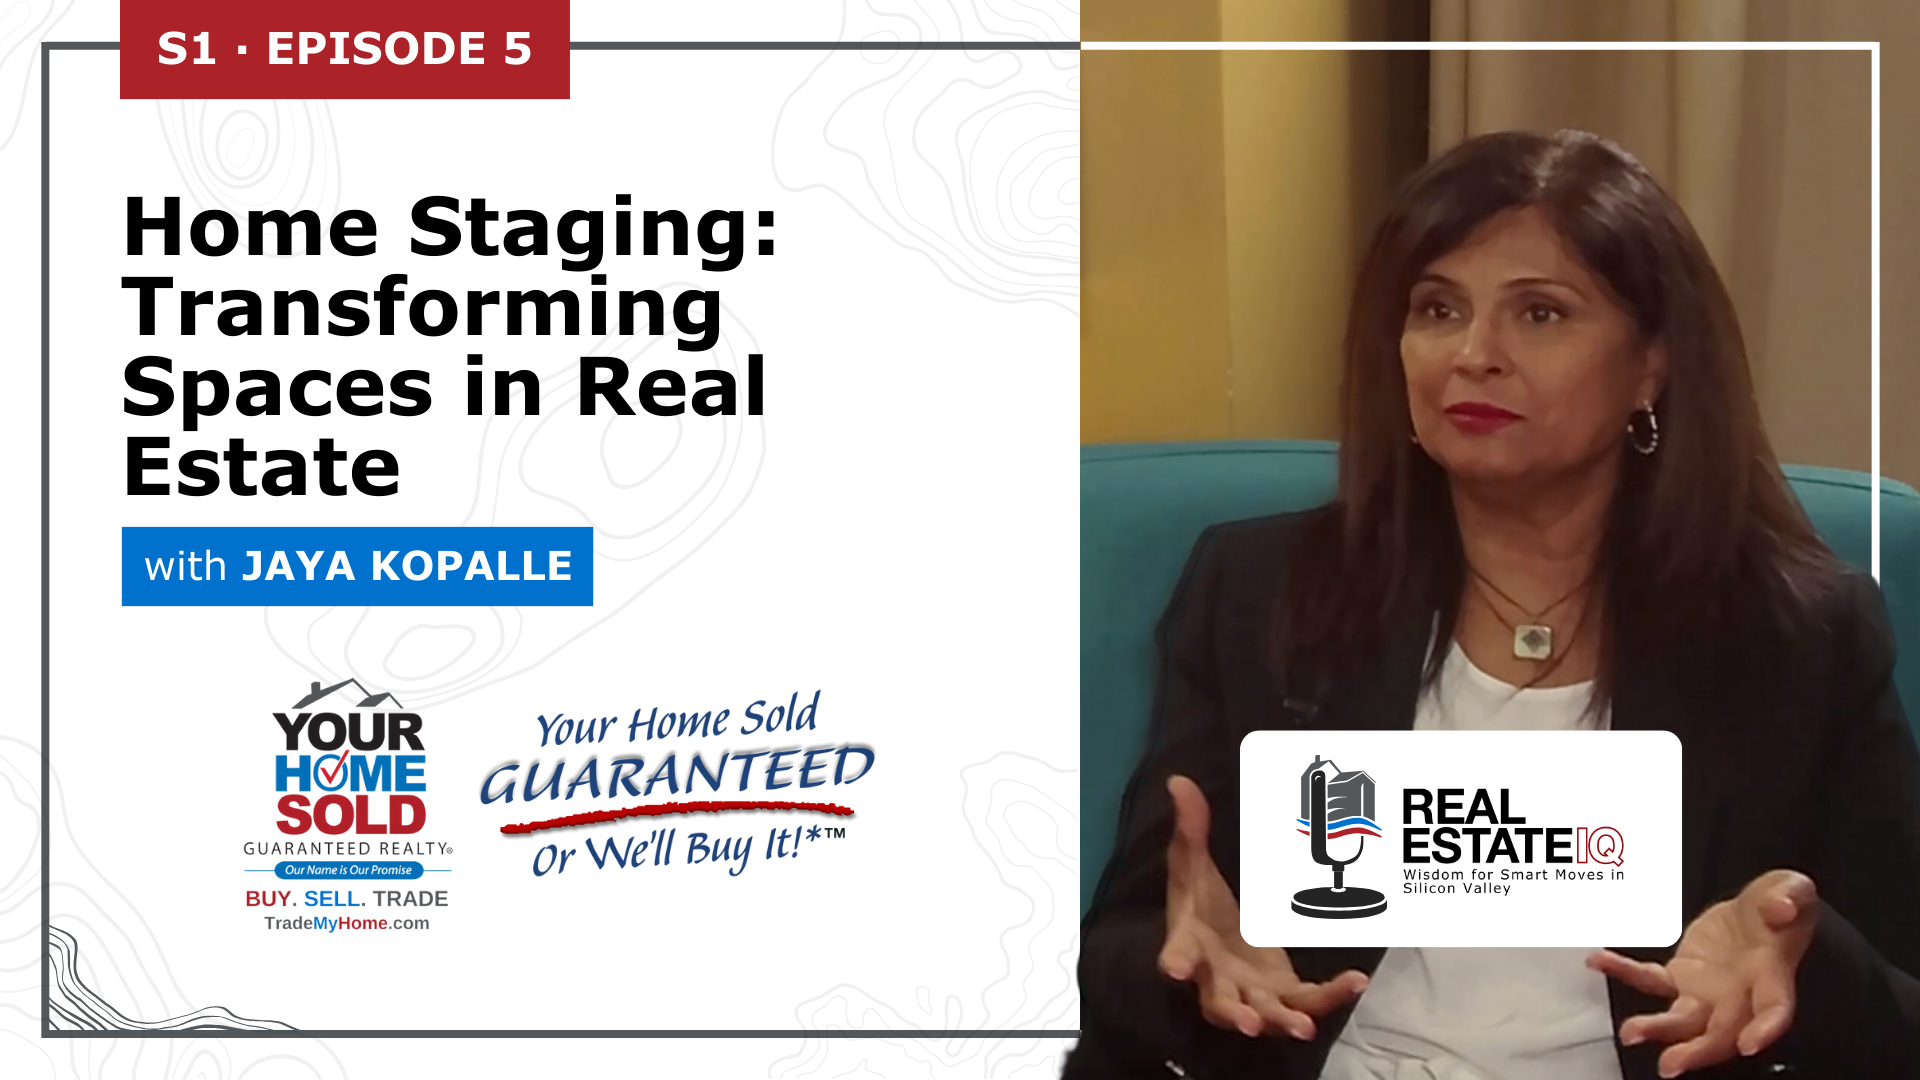 Home Staging: Transforming Spaces in Real Estate with Jaya Kopalle